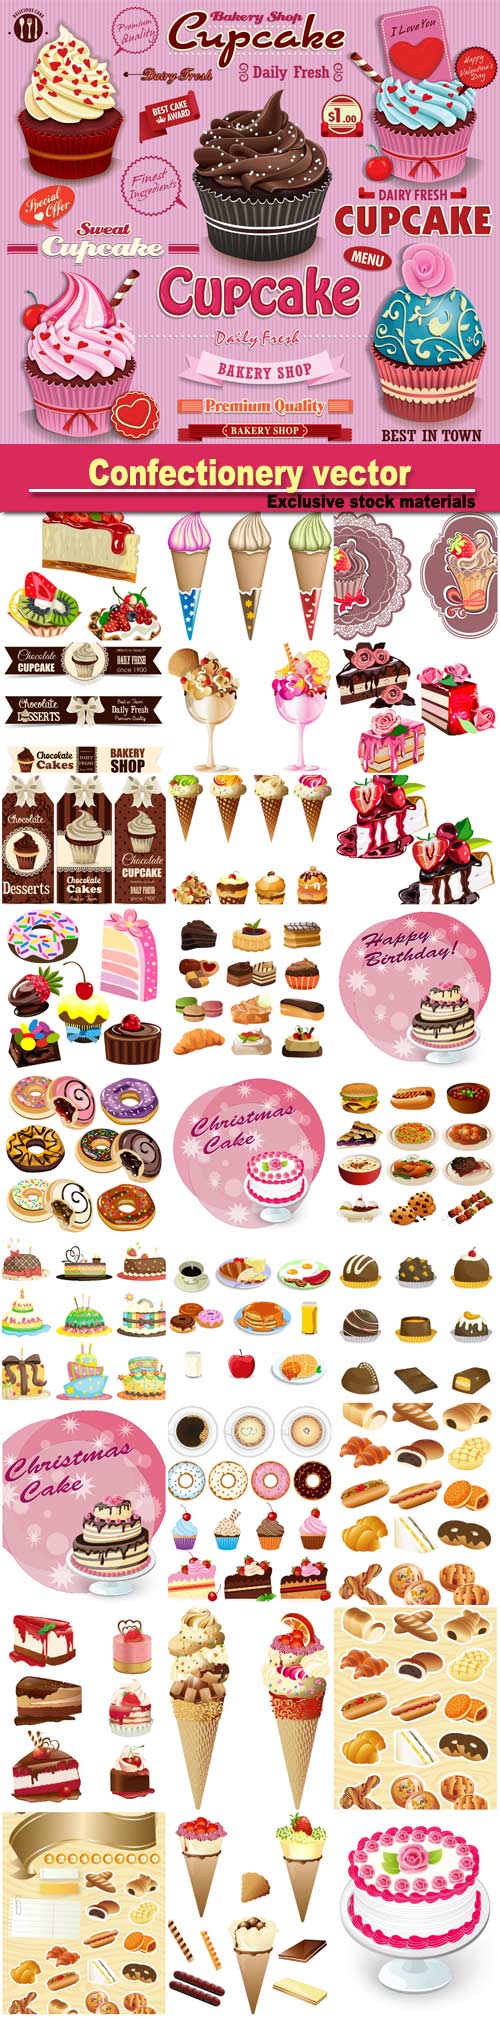 Confectionery vector, muffins, cakes and cake, ice cream